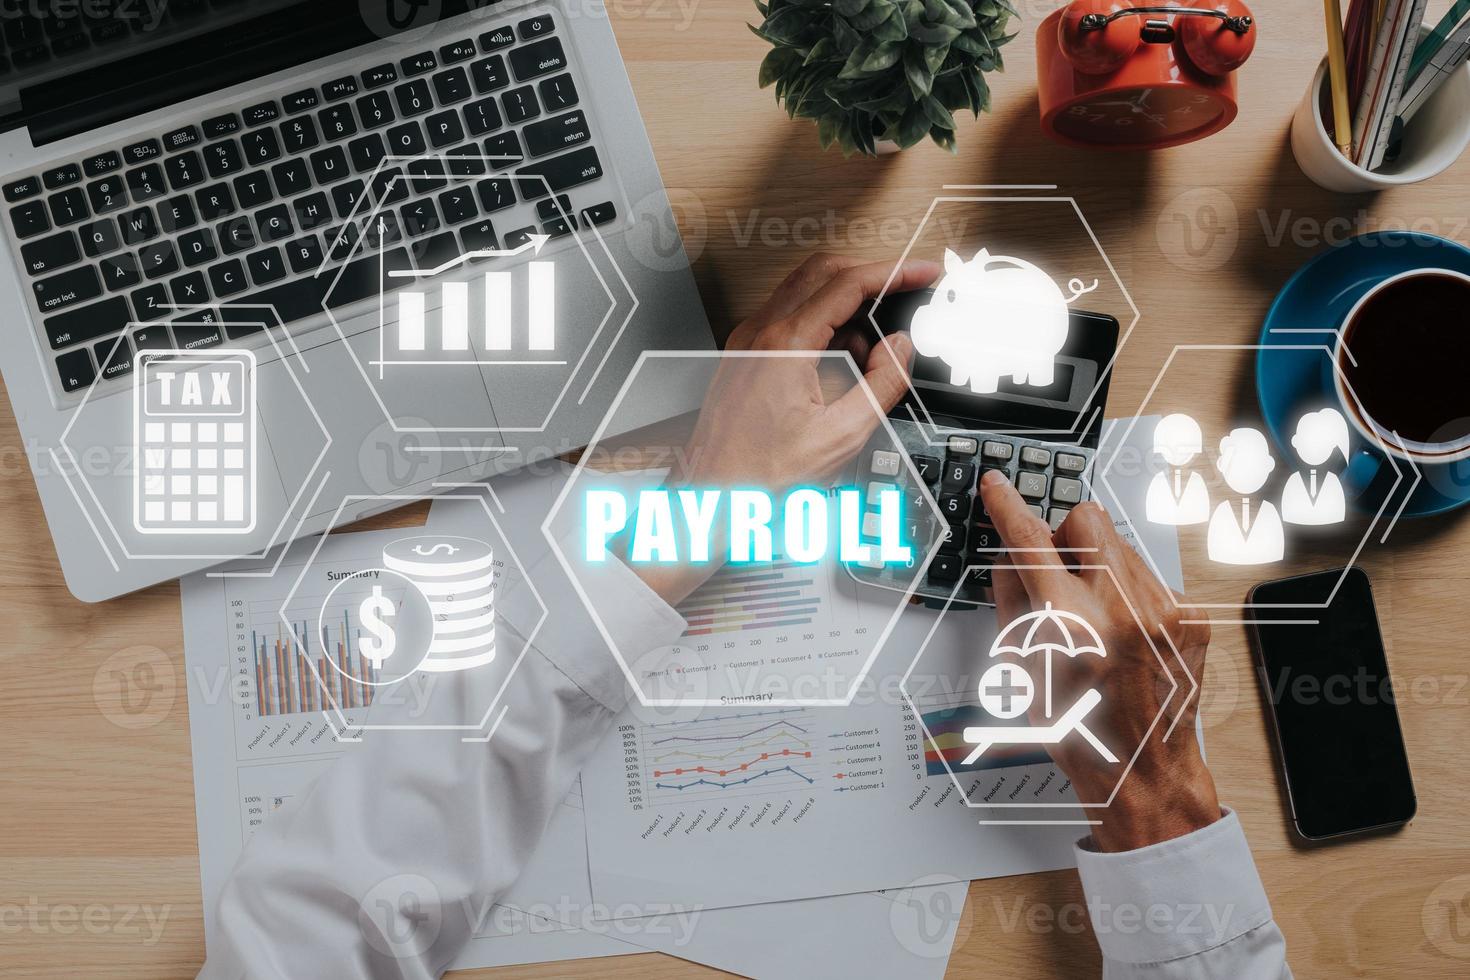 Payroll business finance concept, Businessman analyzing financial data with Payroll icon on VR screen, Financial, accounting. photo